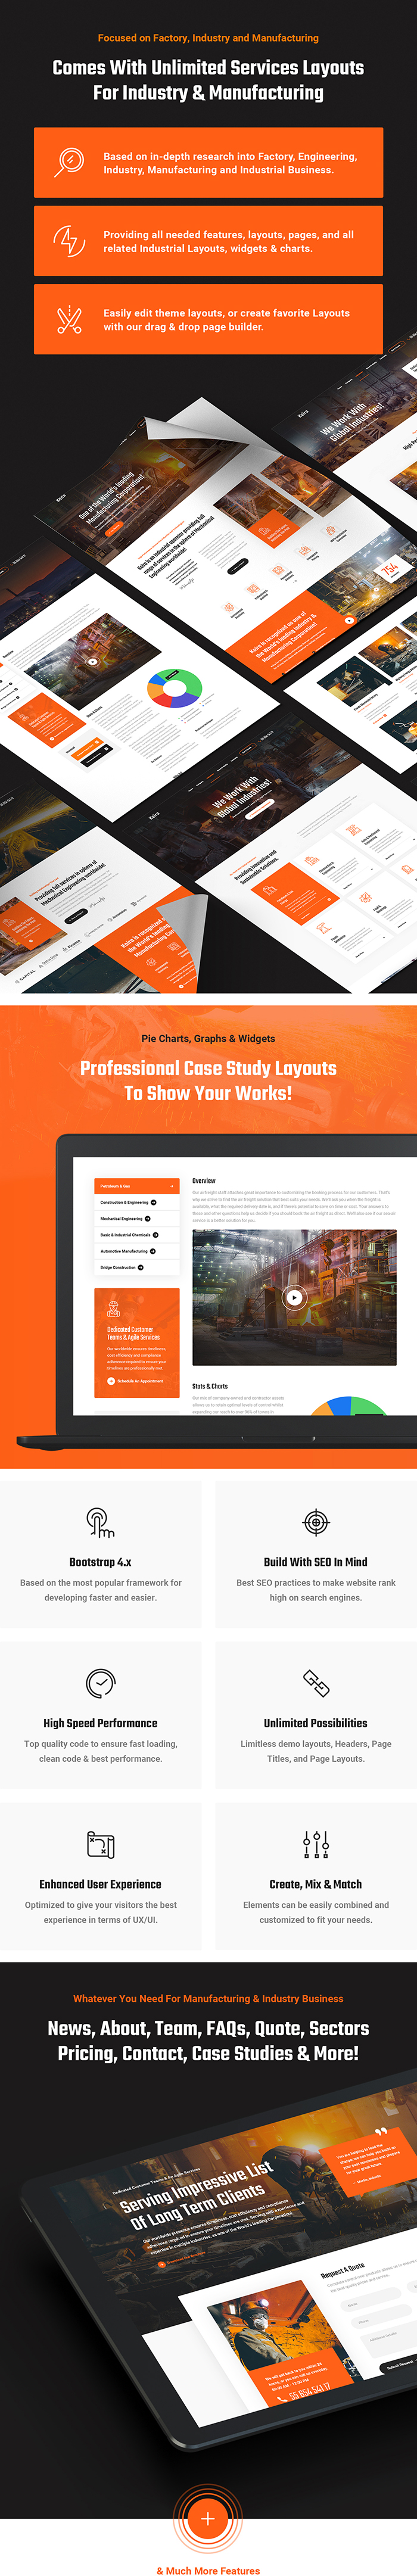 Koira - Industry and Manufacturing HTML5 Template - 7